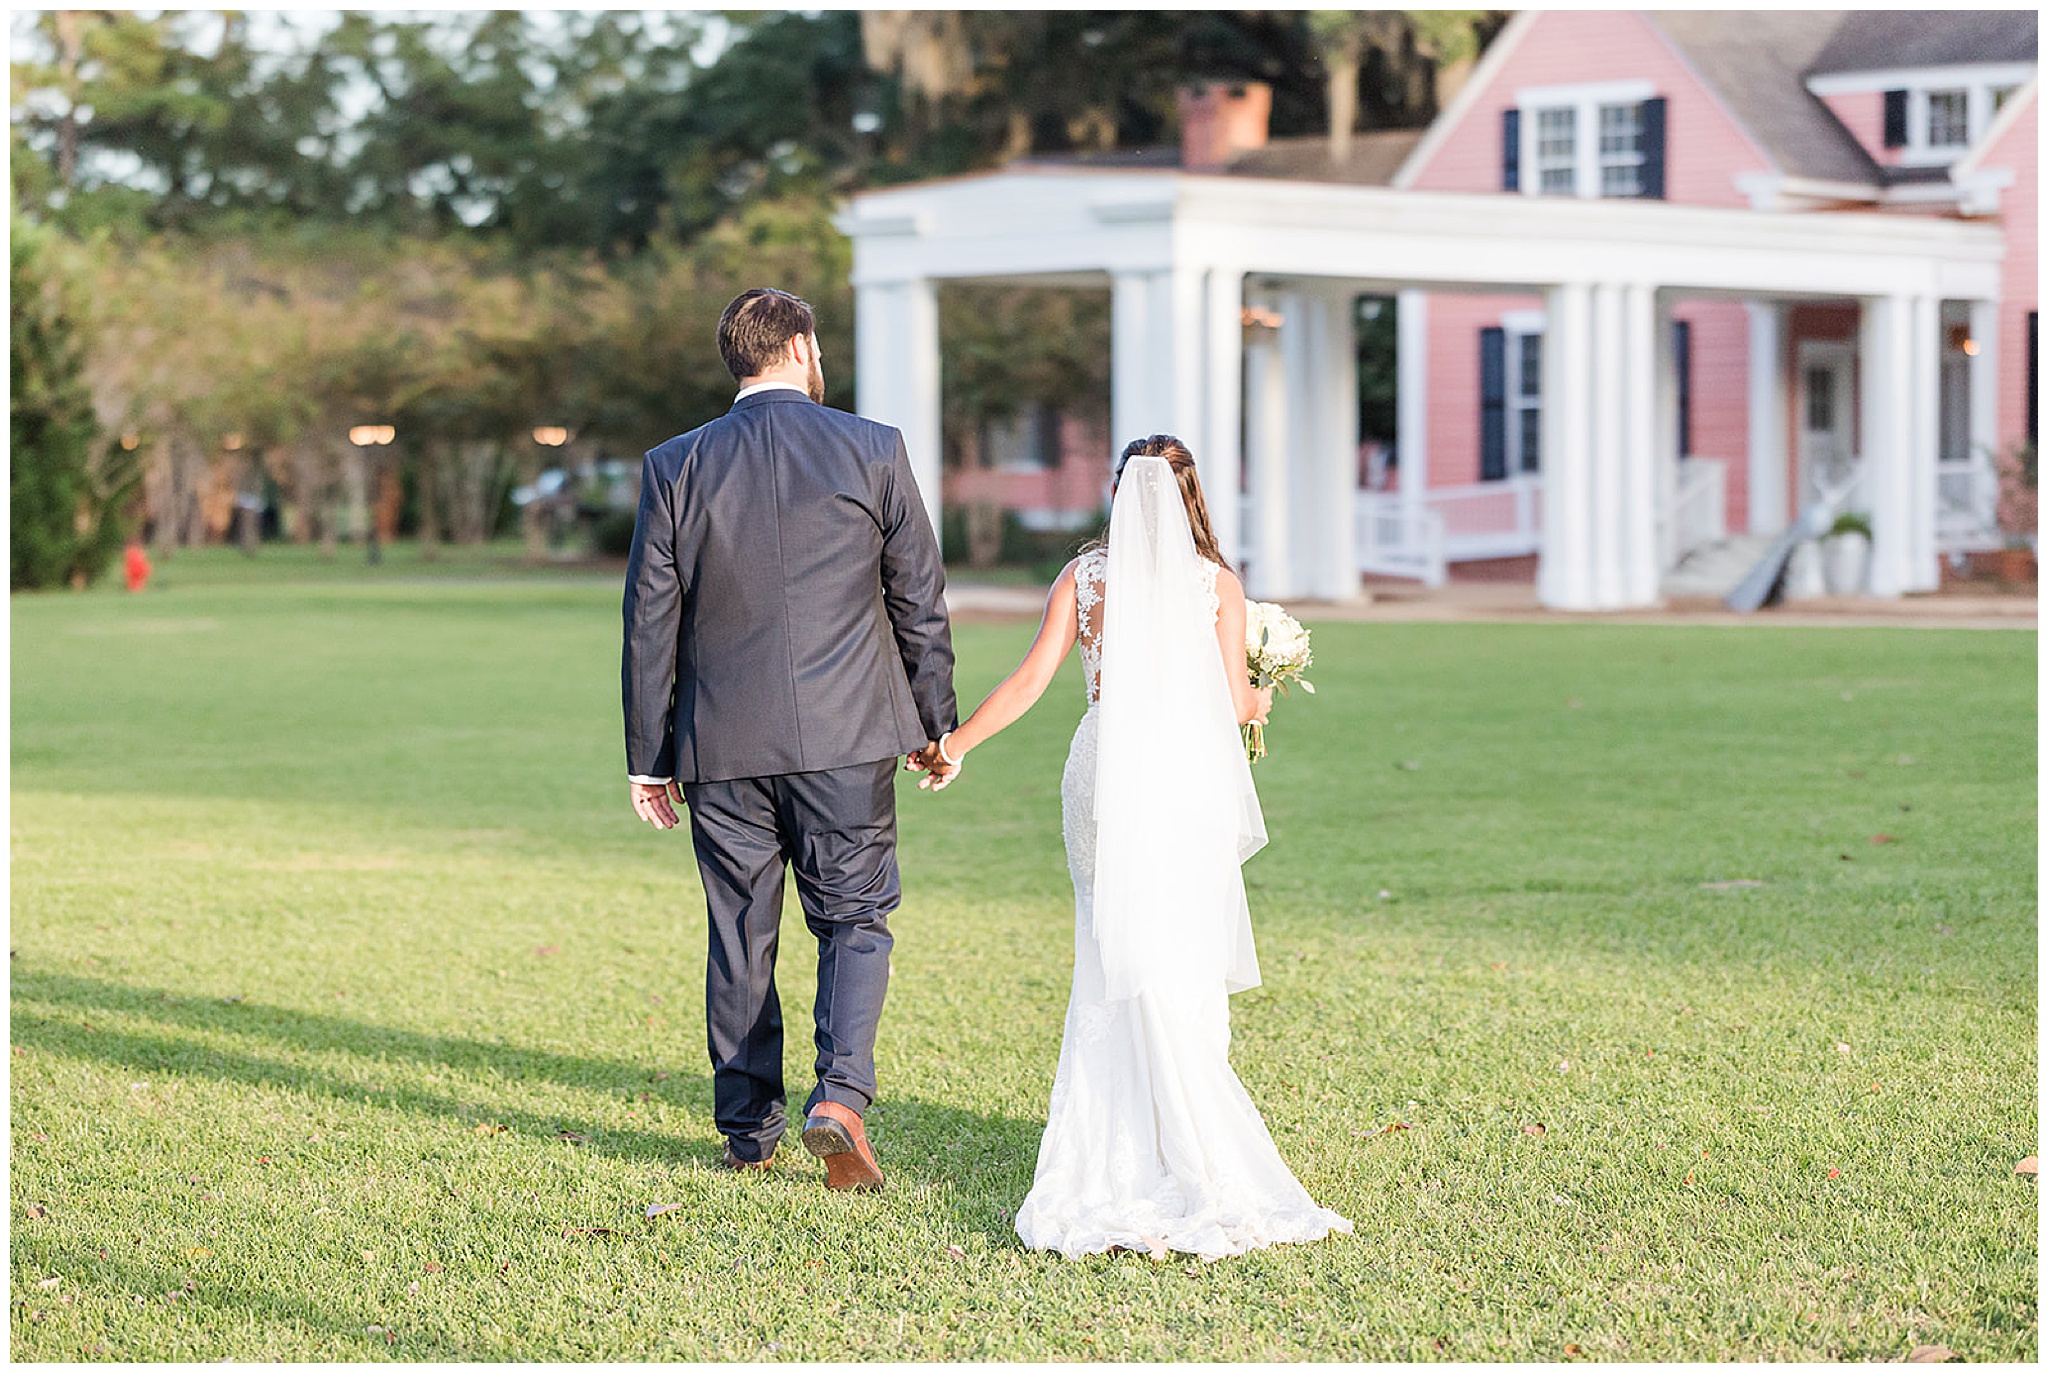 Newlyweds hold hands while walking through a manicured lawn towards a pink building